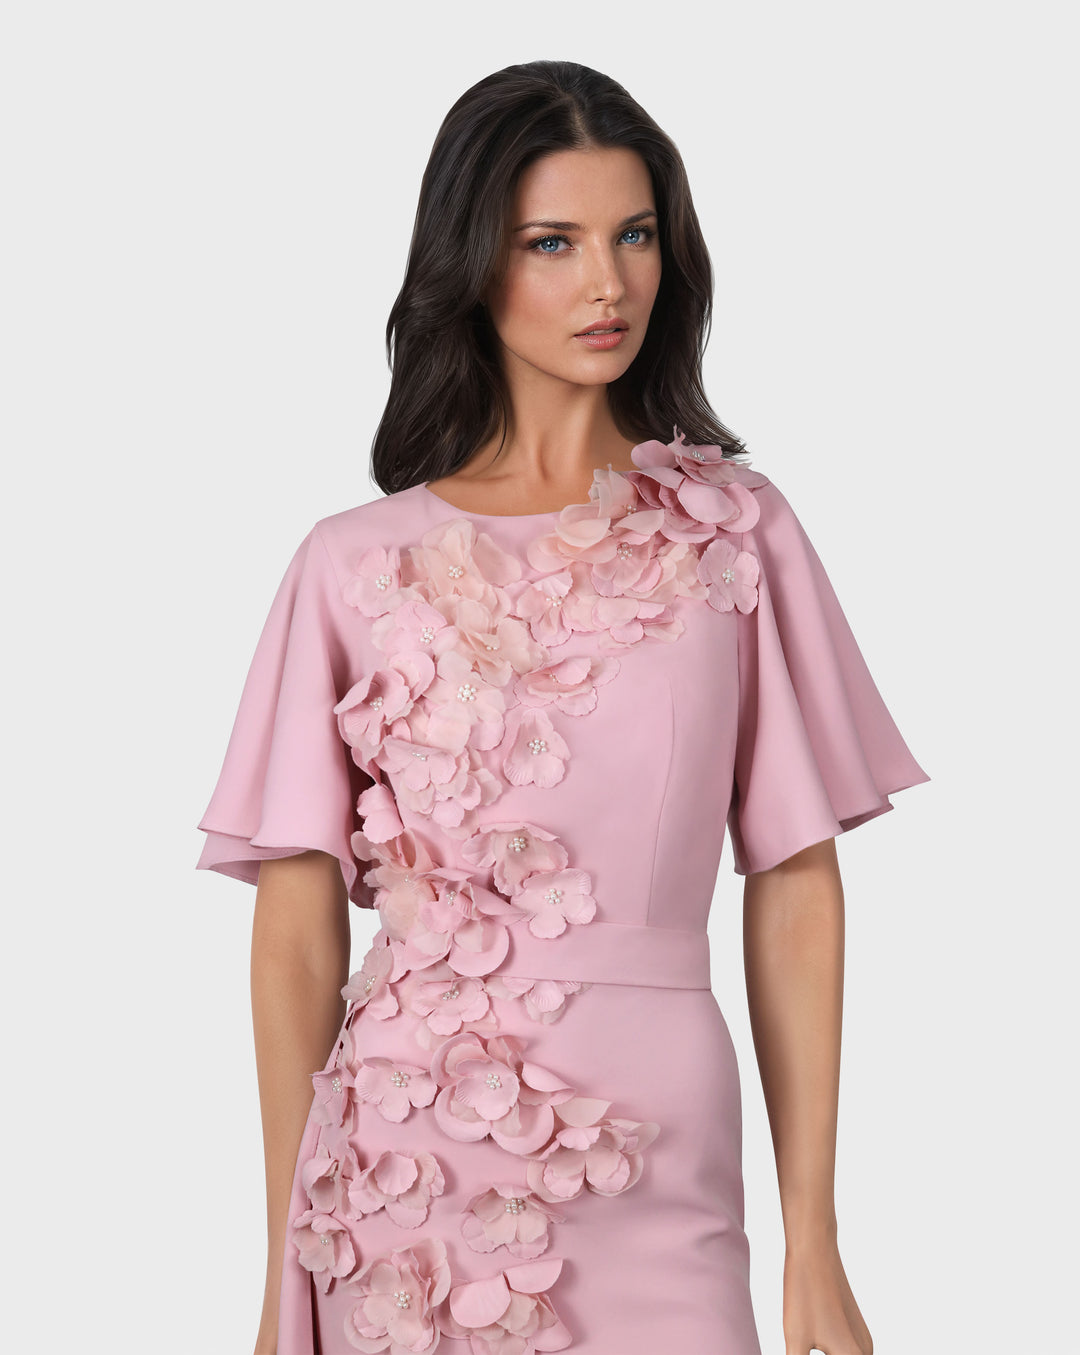 3D flowered dress with detachable train